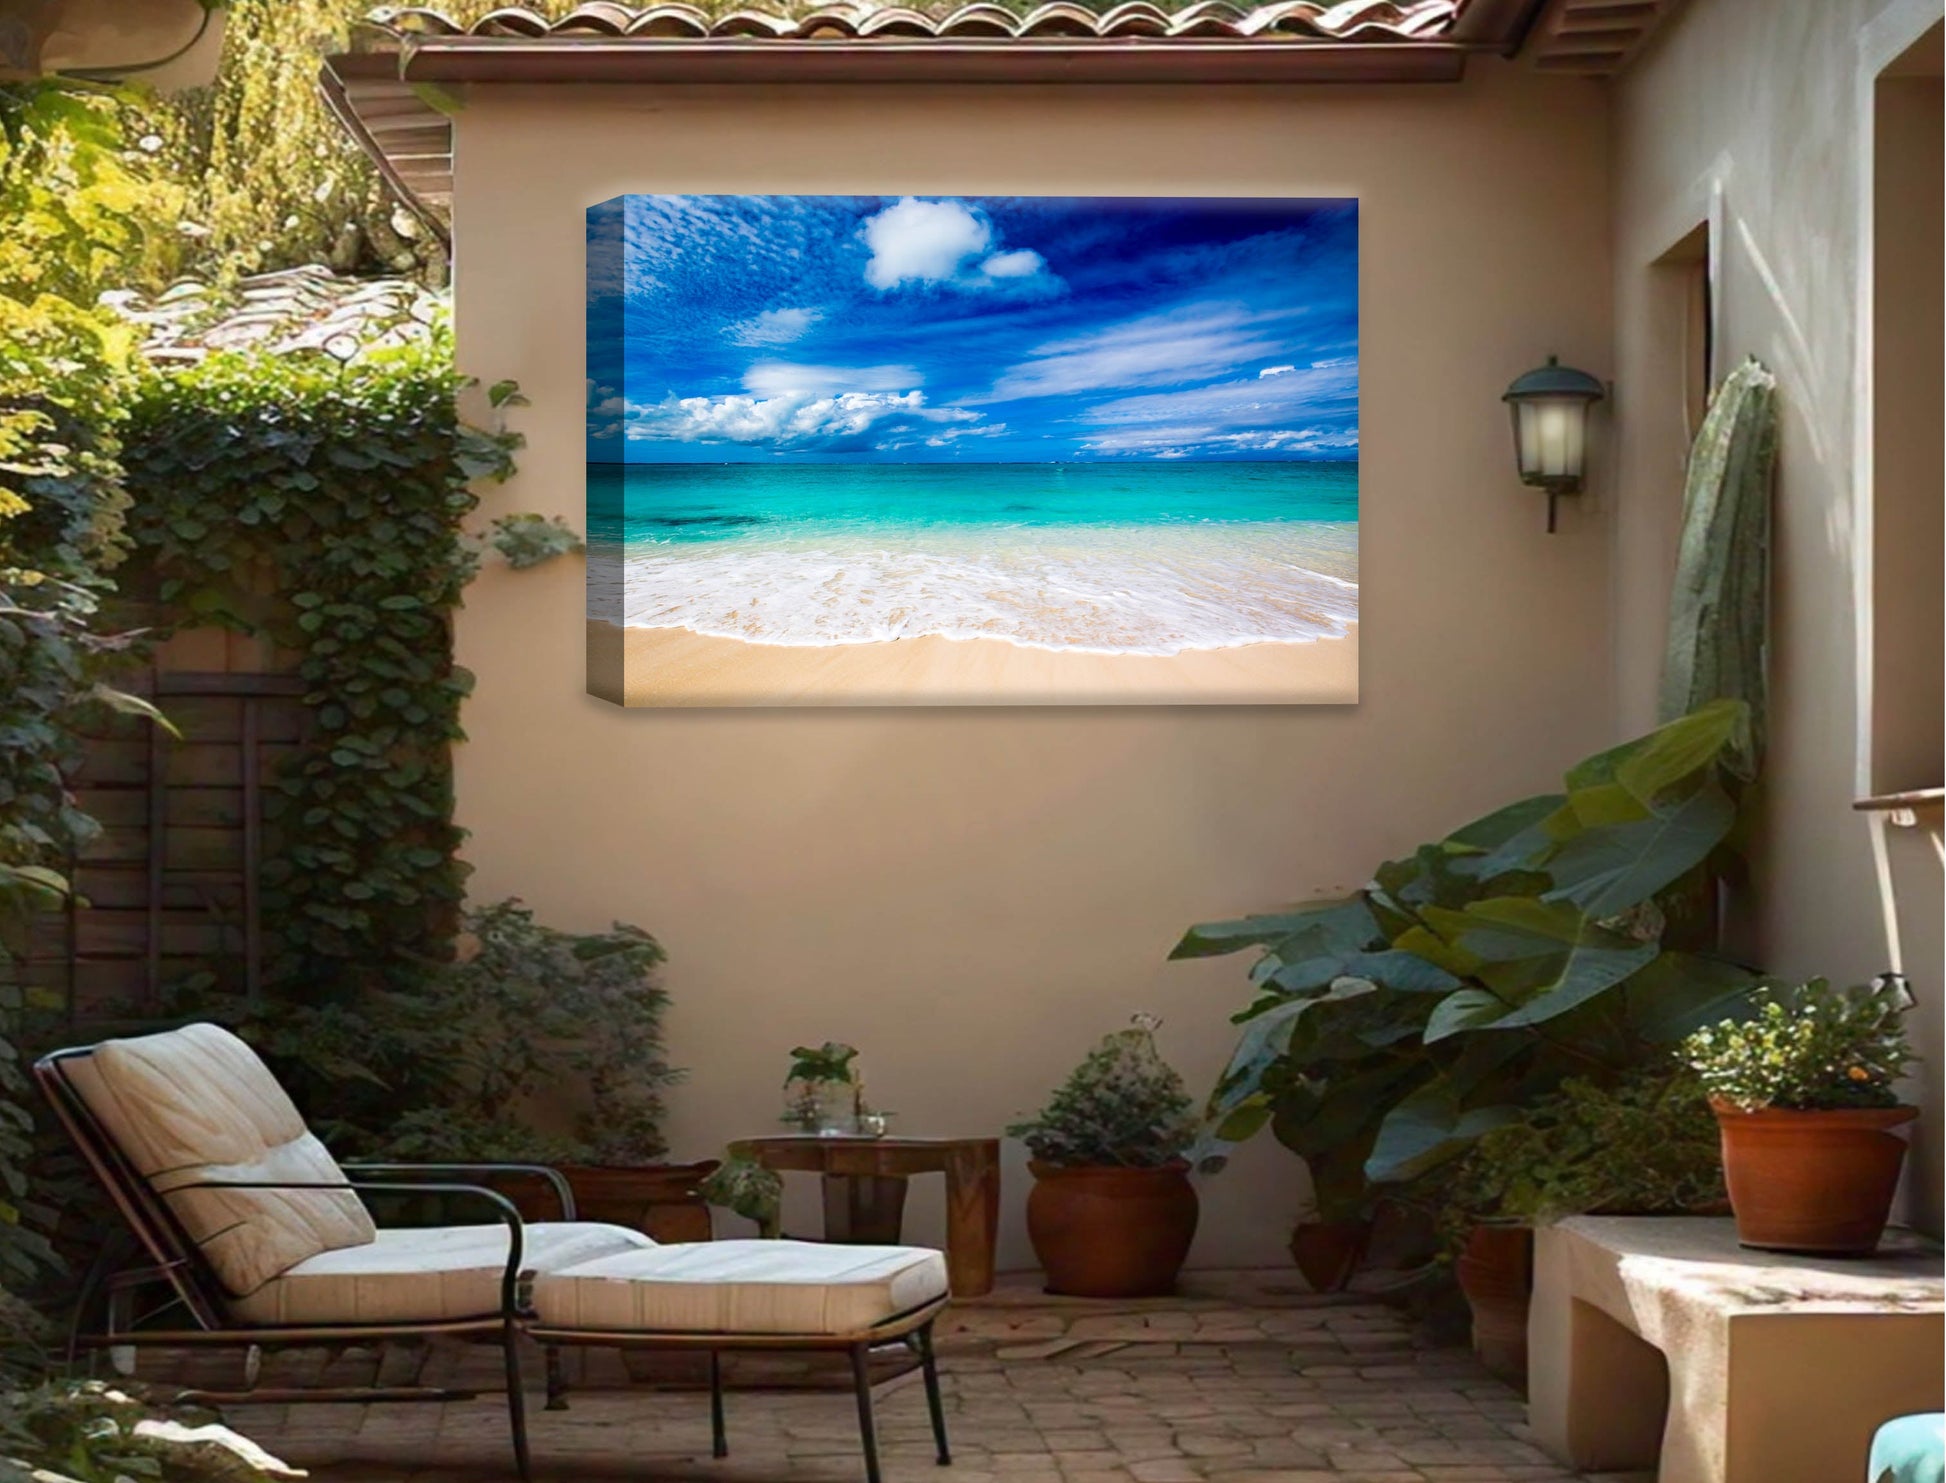 White Sand Beach - Evening on the Pond - Canvas Wrap - Waterproof on Patio 4 Wall